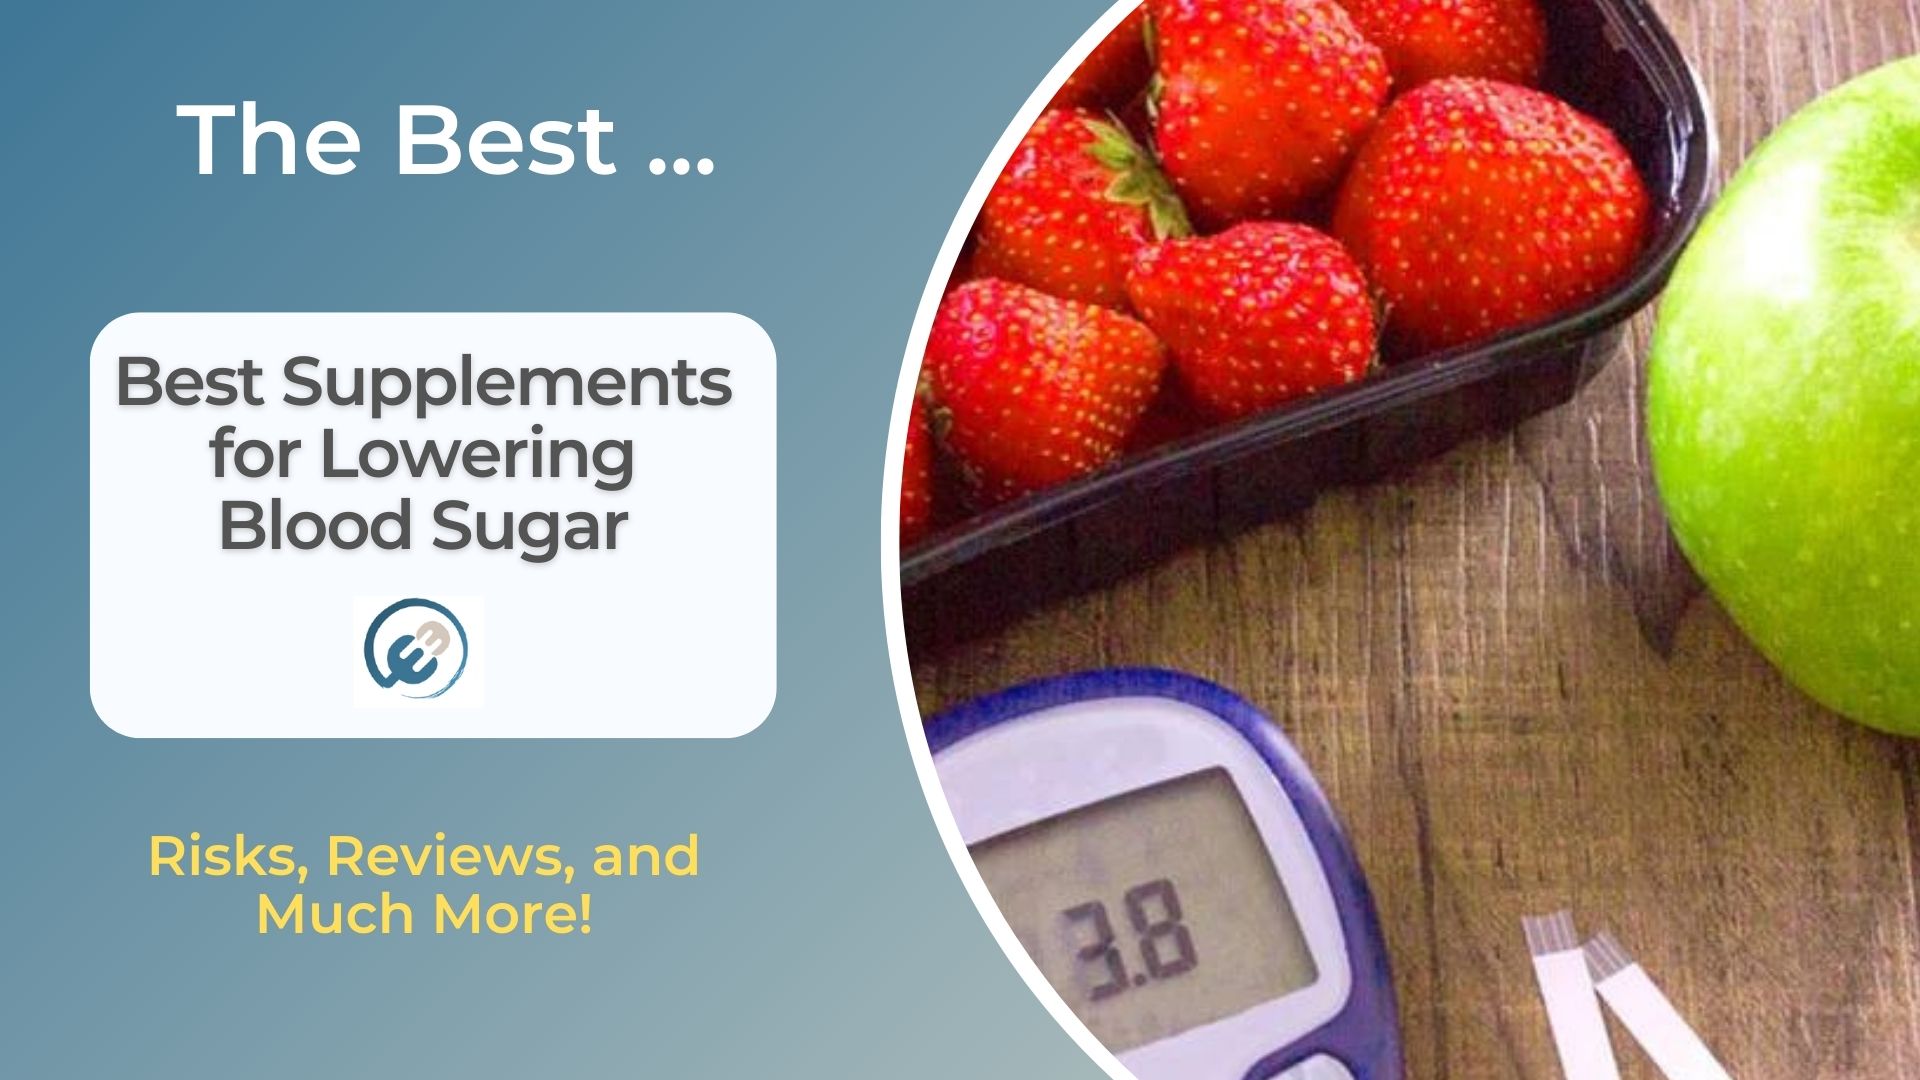 Best Supplements for Lowering Blood Sugar